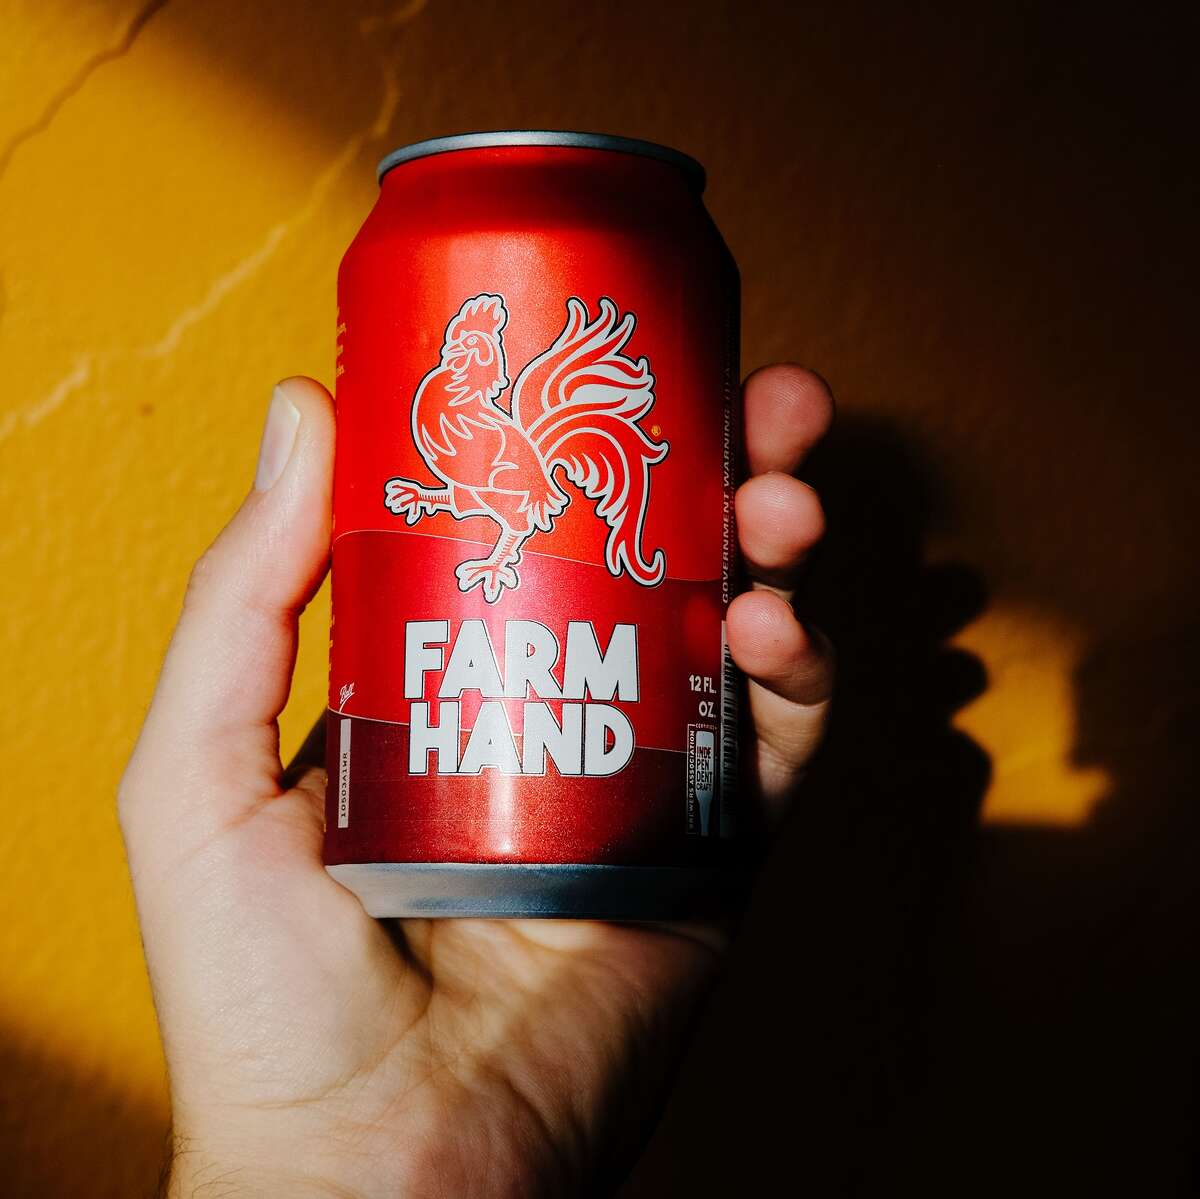 A true champion of Beer Flavored Beer, I give you Farm Hand, made with love by Brewery Vivant. 